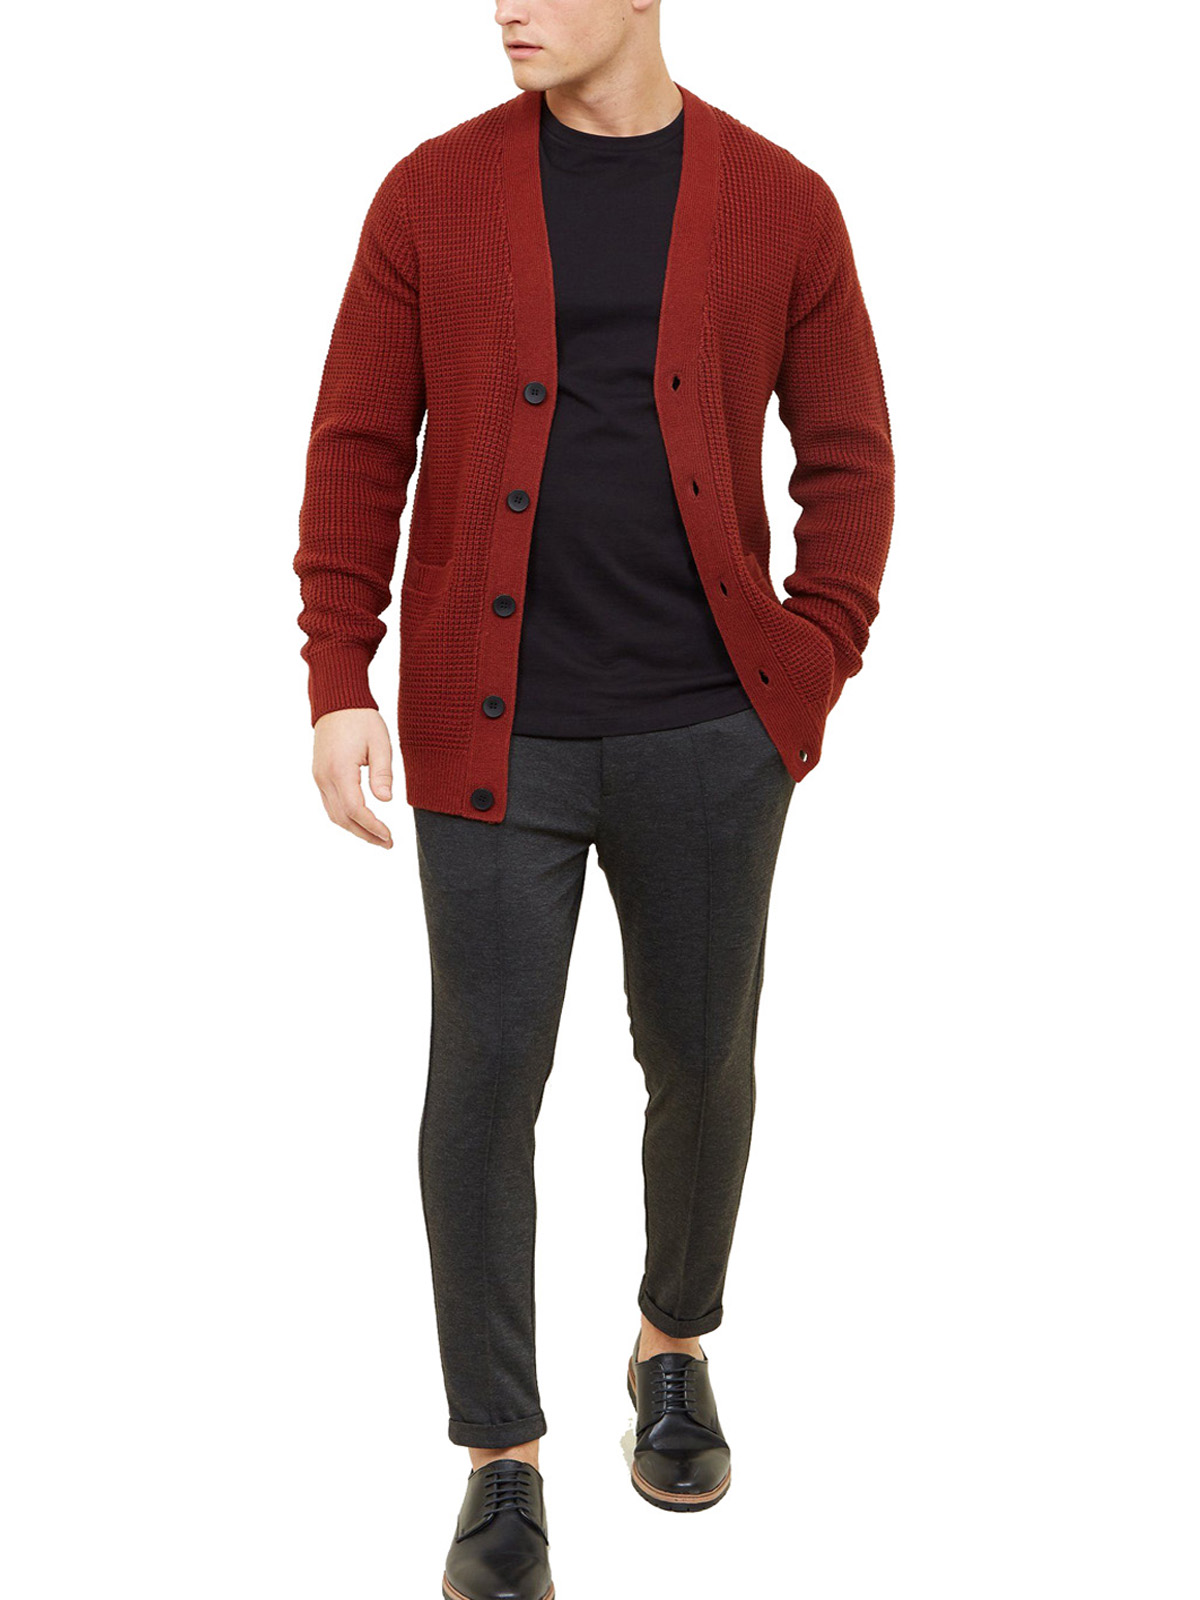 mens red button up cardigan